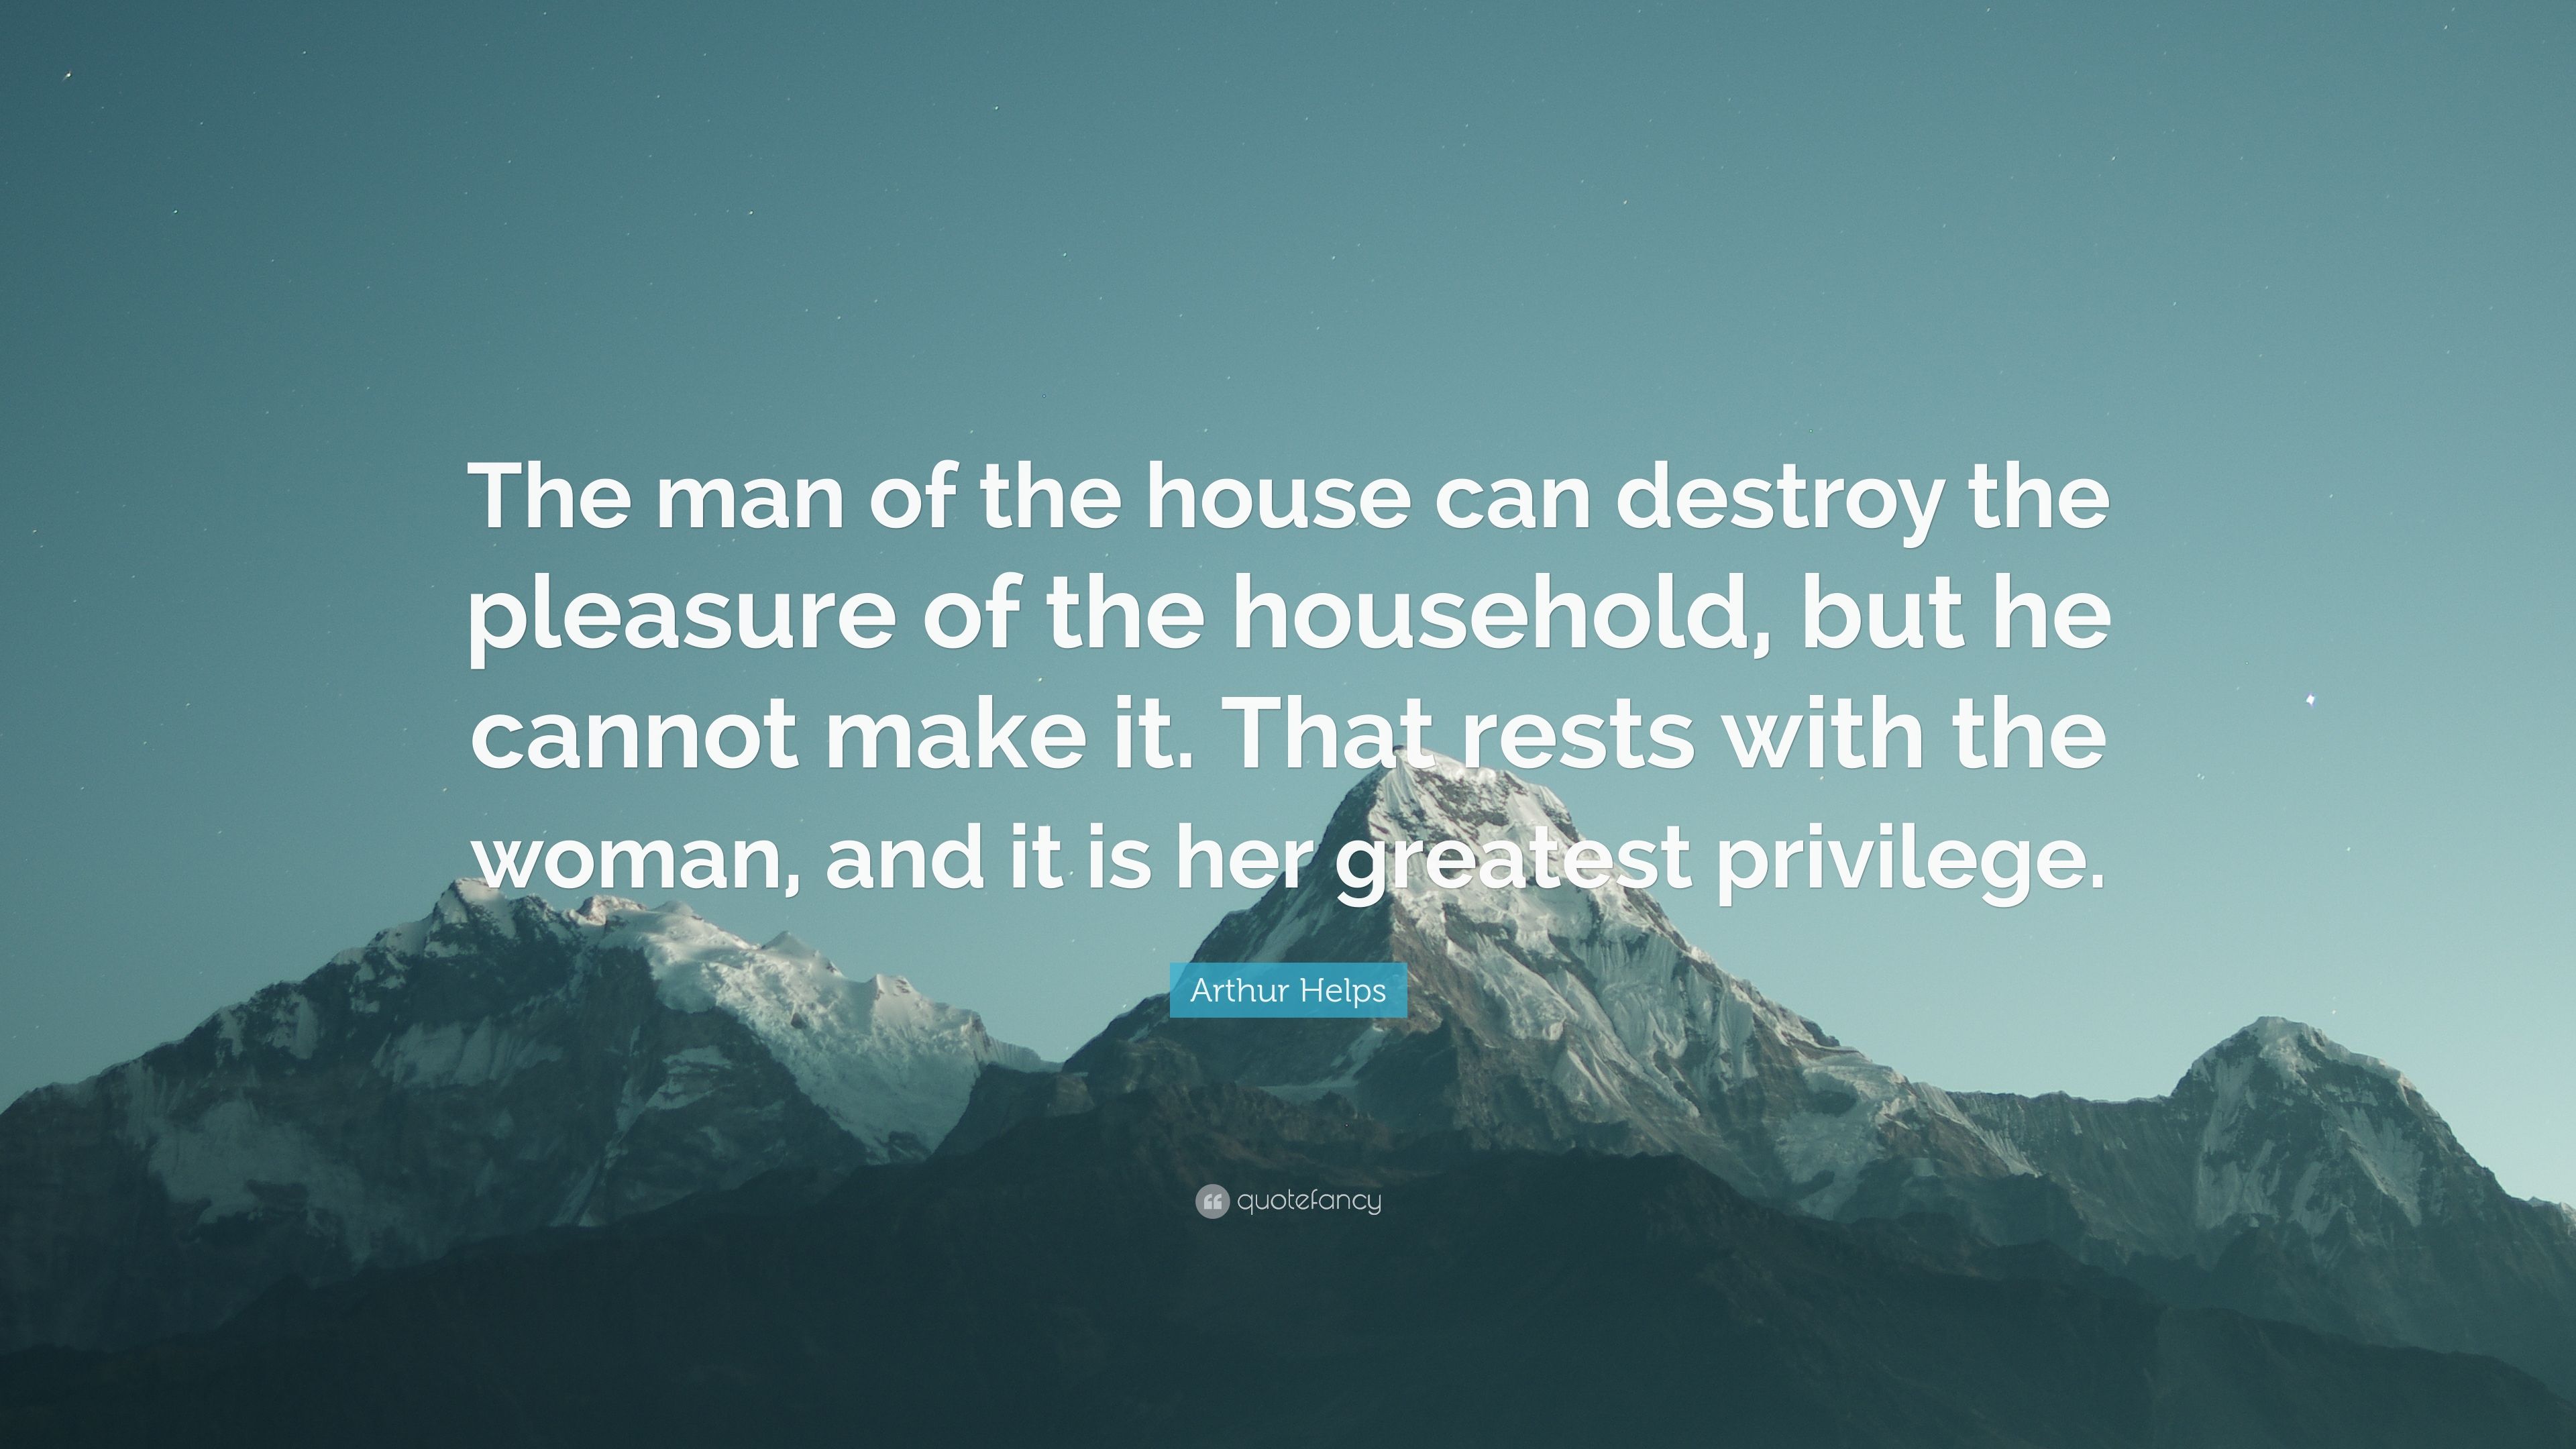 be the man of the house